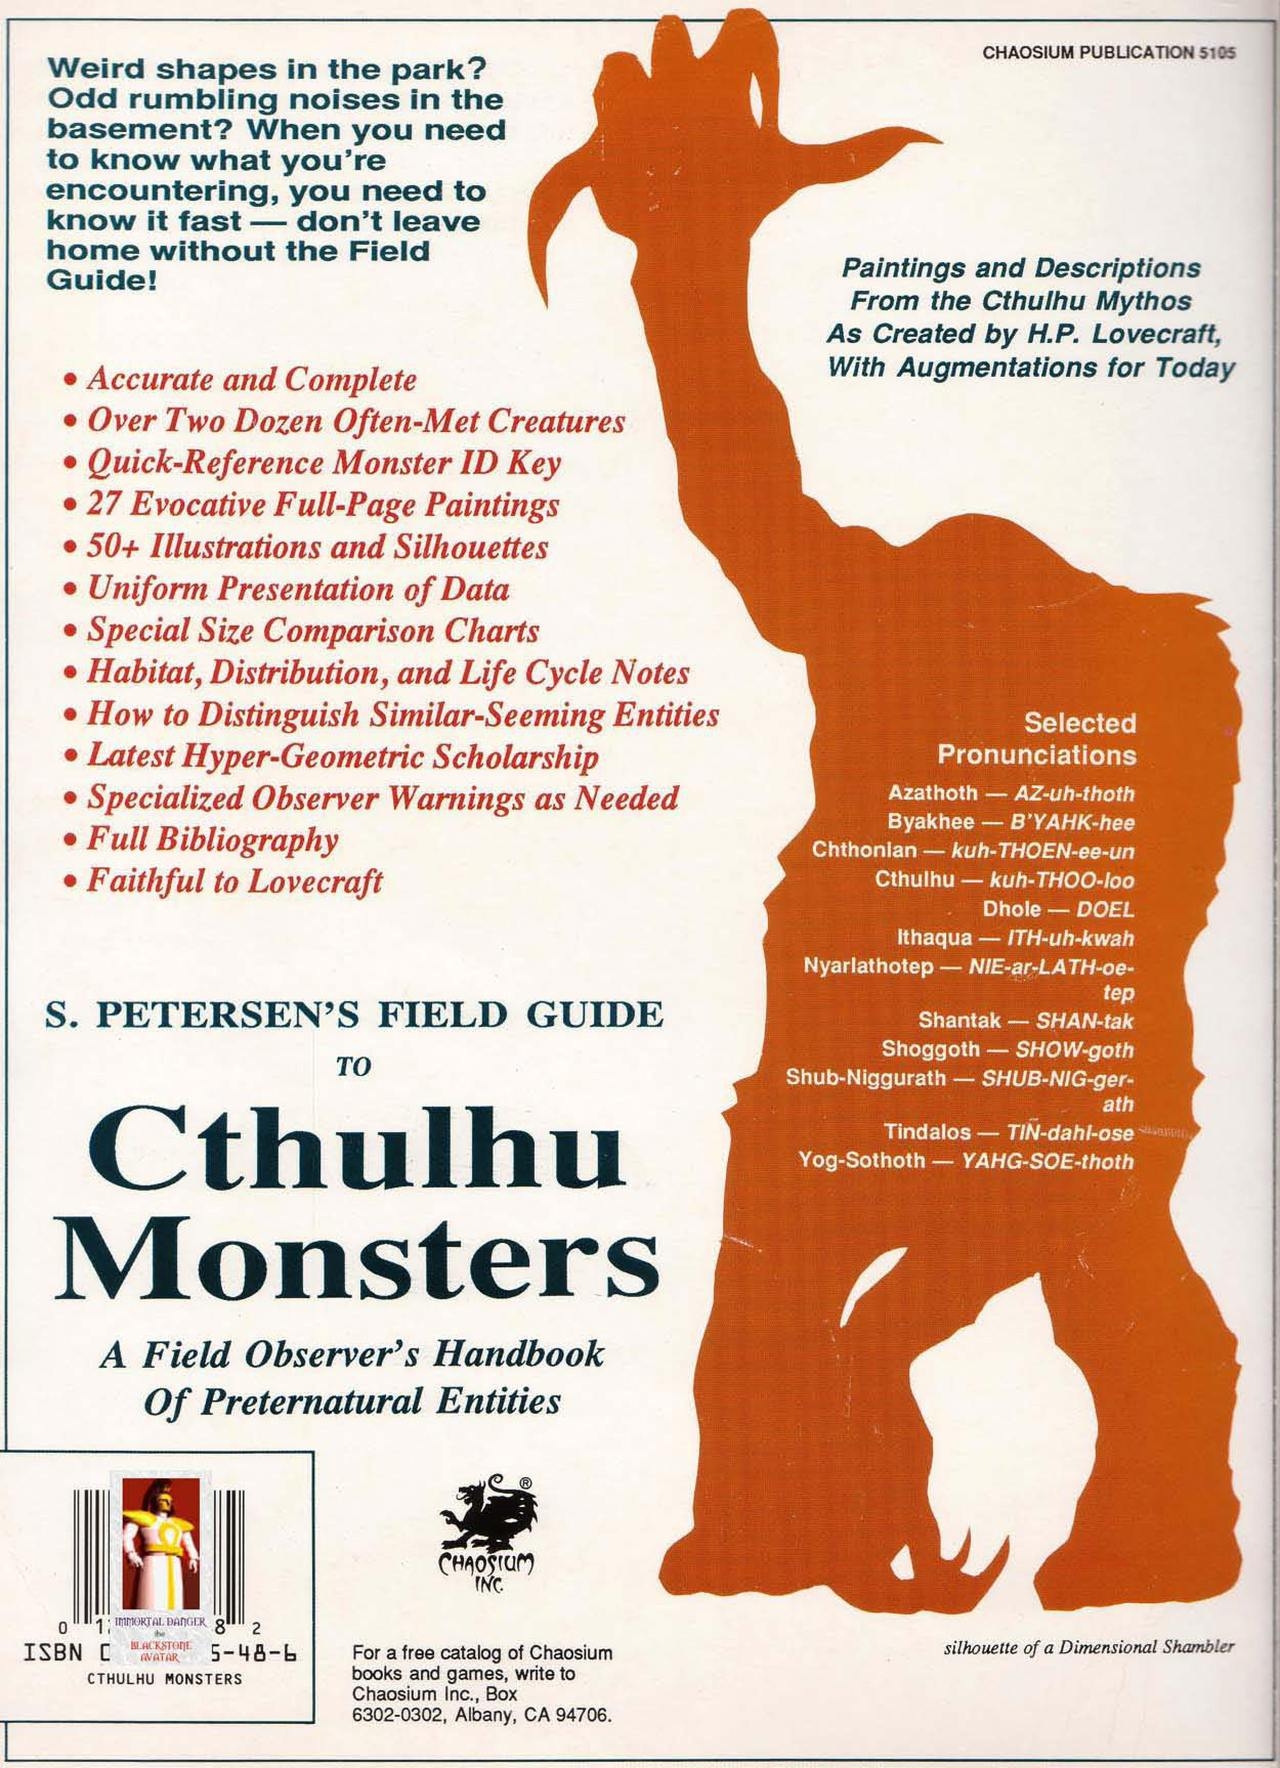 S. Petersen's Field Guide to Cthulhu Monsters 64